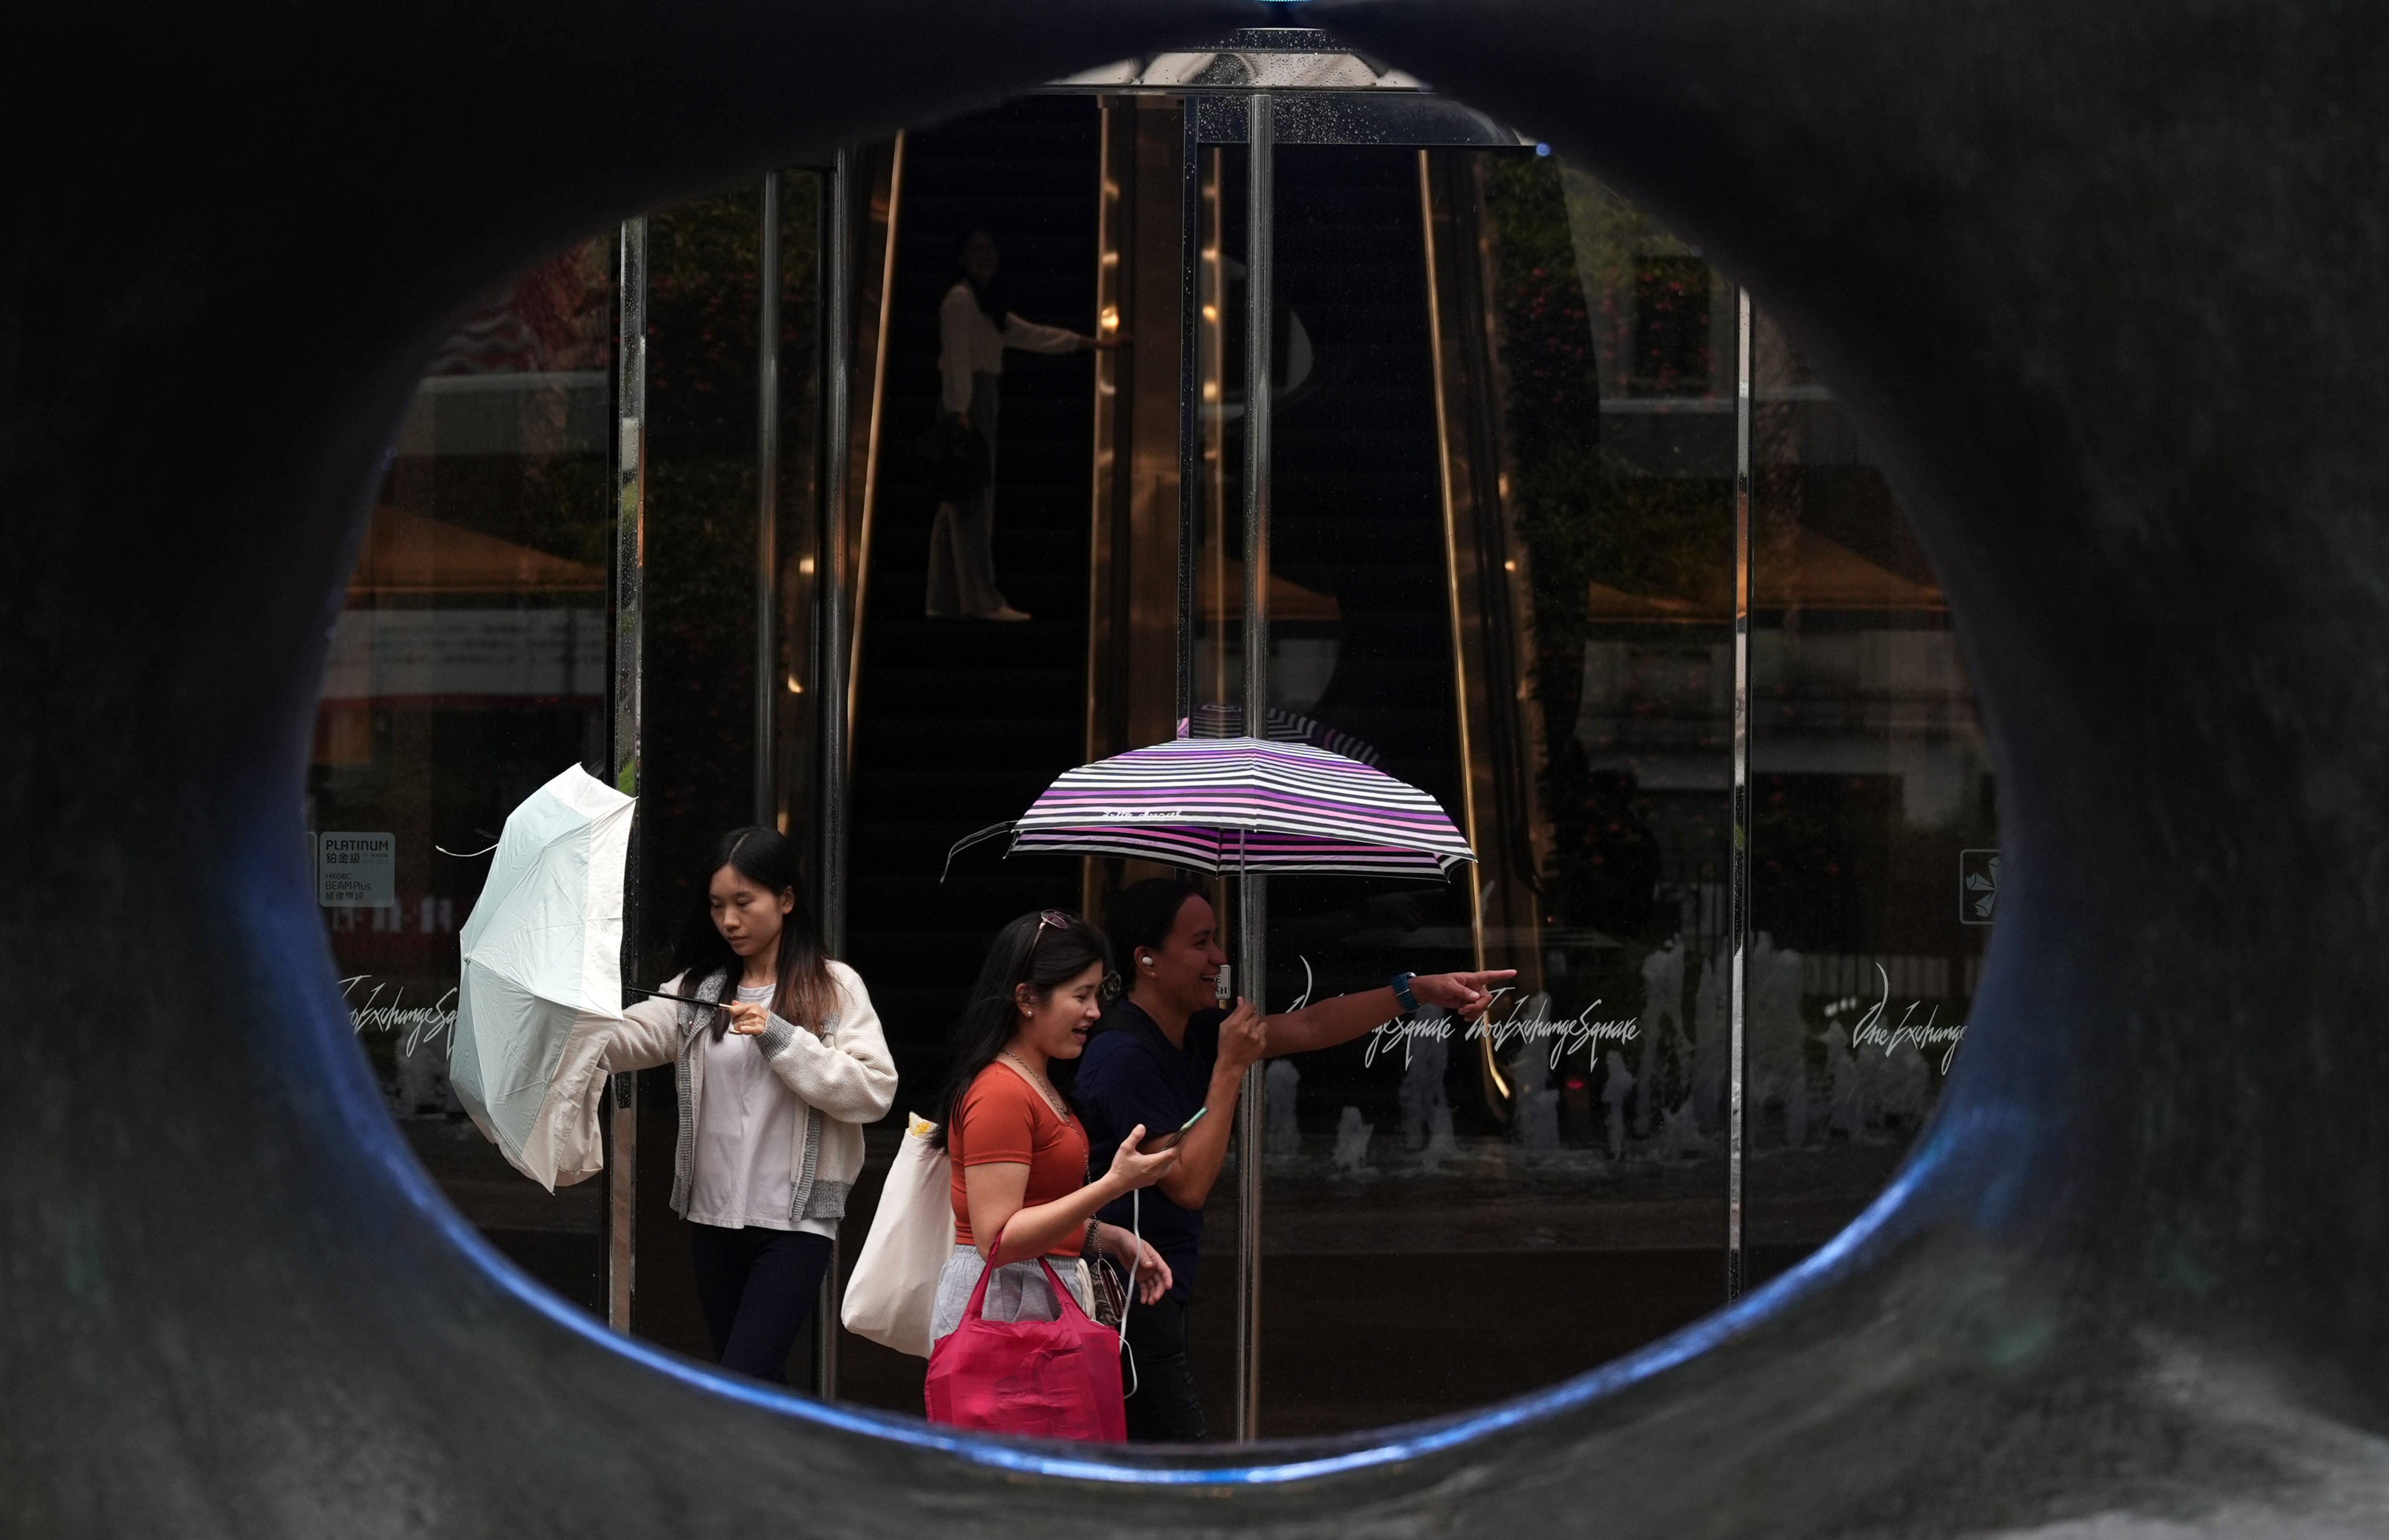 Pedestrians walk past Exchange Sqaure in Central under rainy and gusty conditions. Photo: Eugene Lee